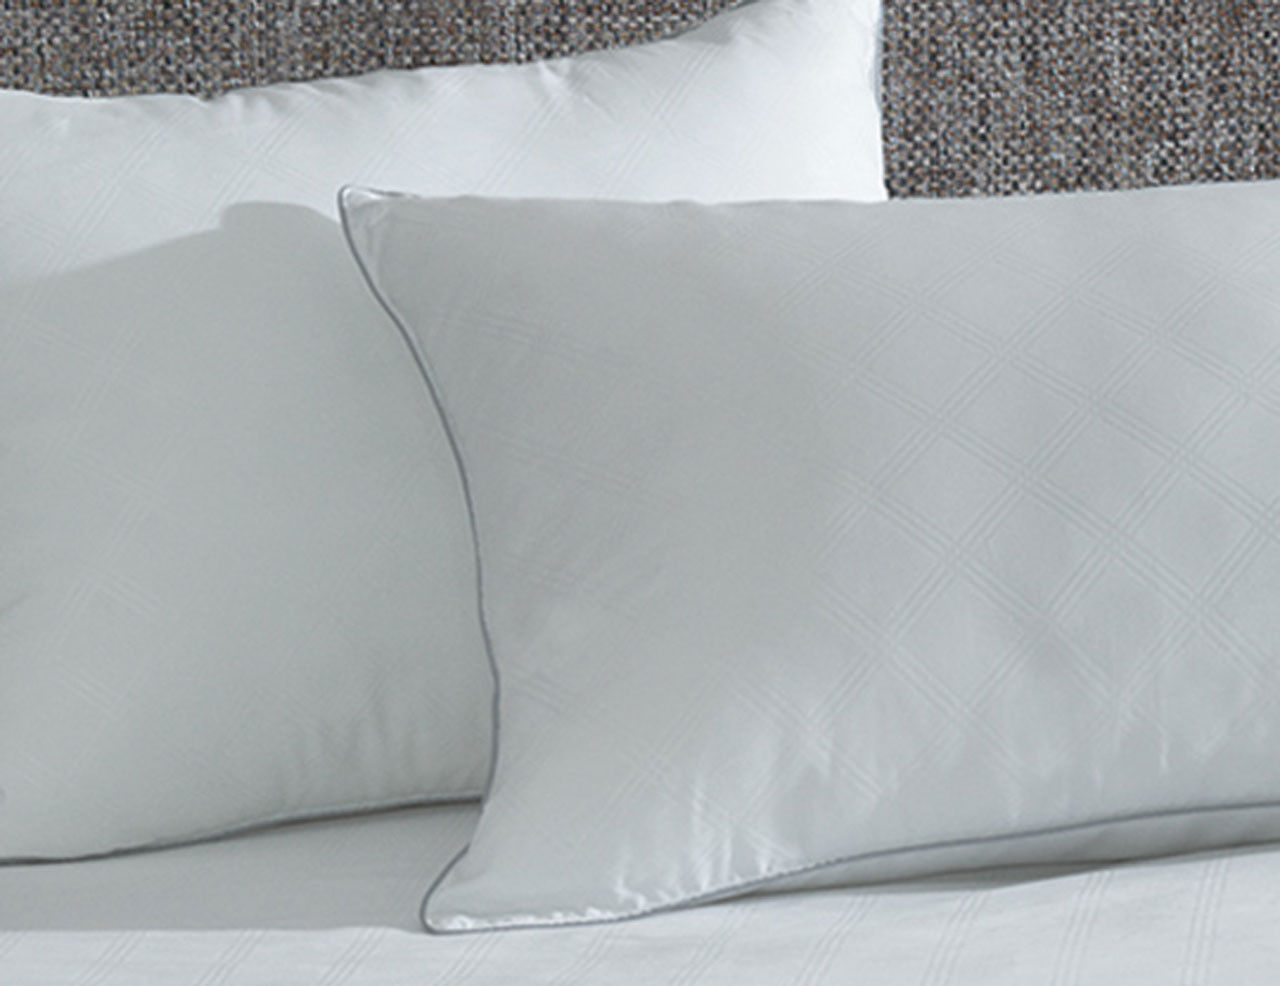 What type of fill do these AllerEase Ultimate Professional Pillows have?